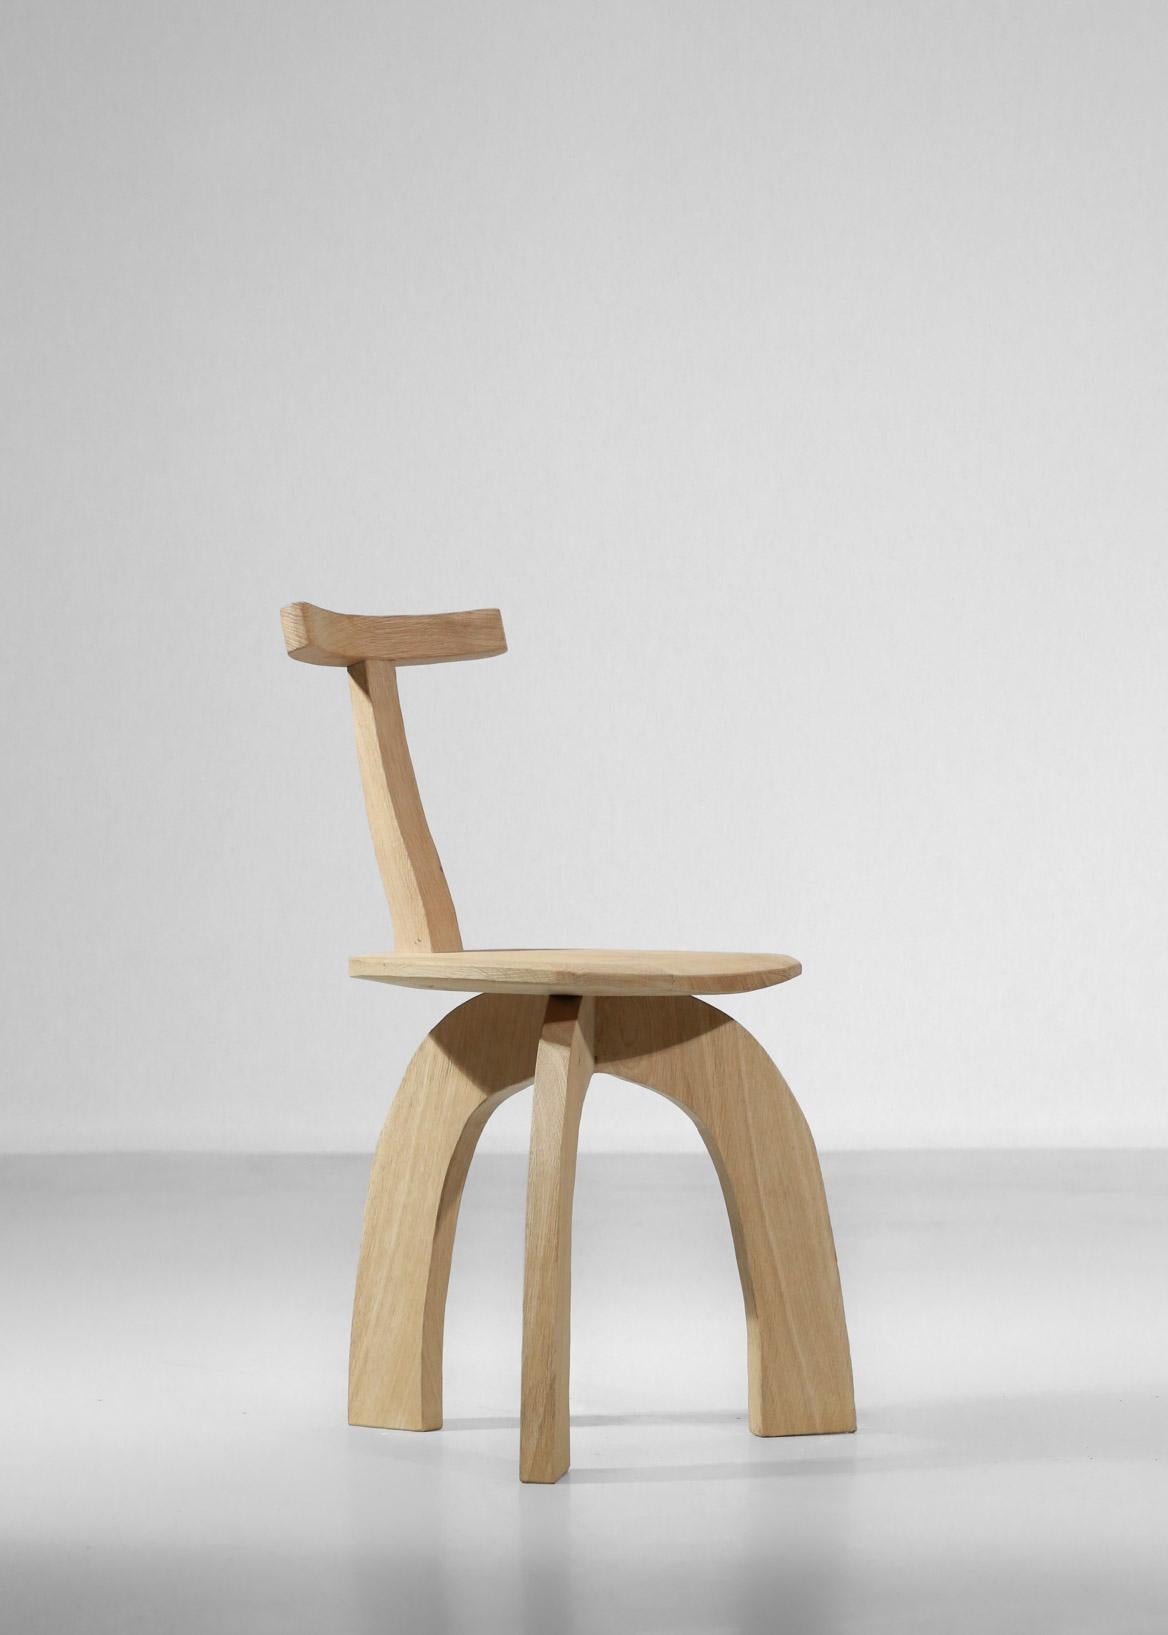 Artisanal Modern 80/20 Oak or Sycamore Chair Created by Vincent Vincent For Sale 6